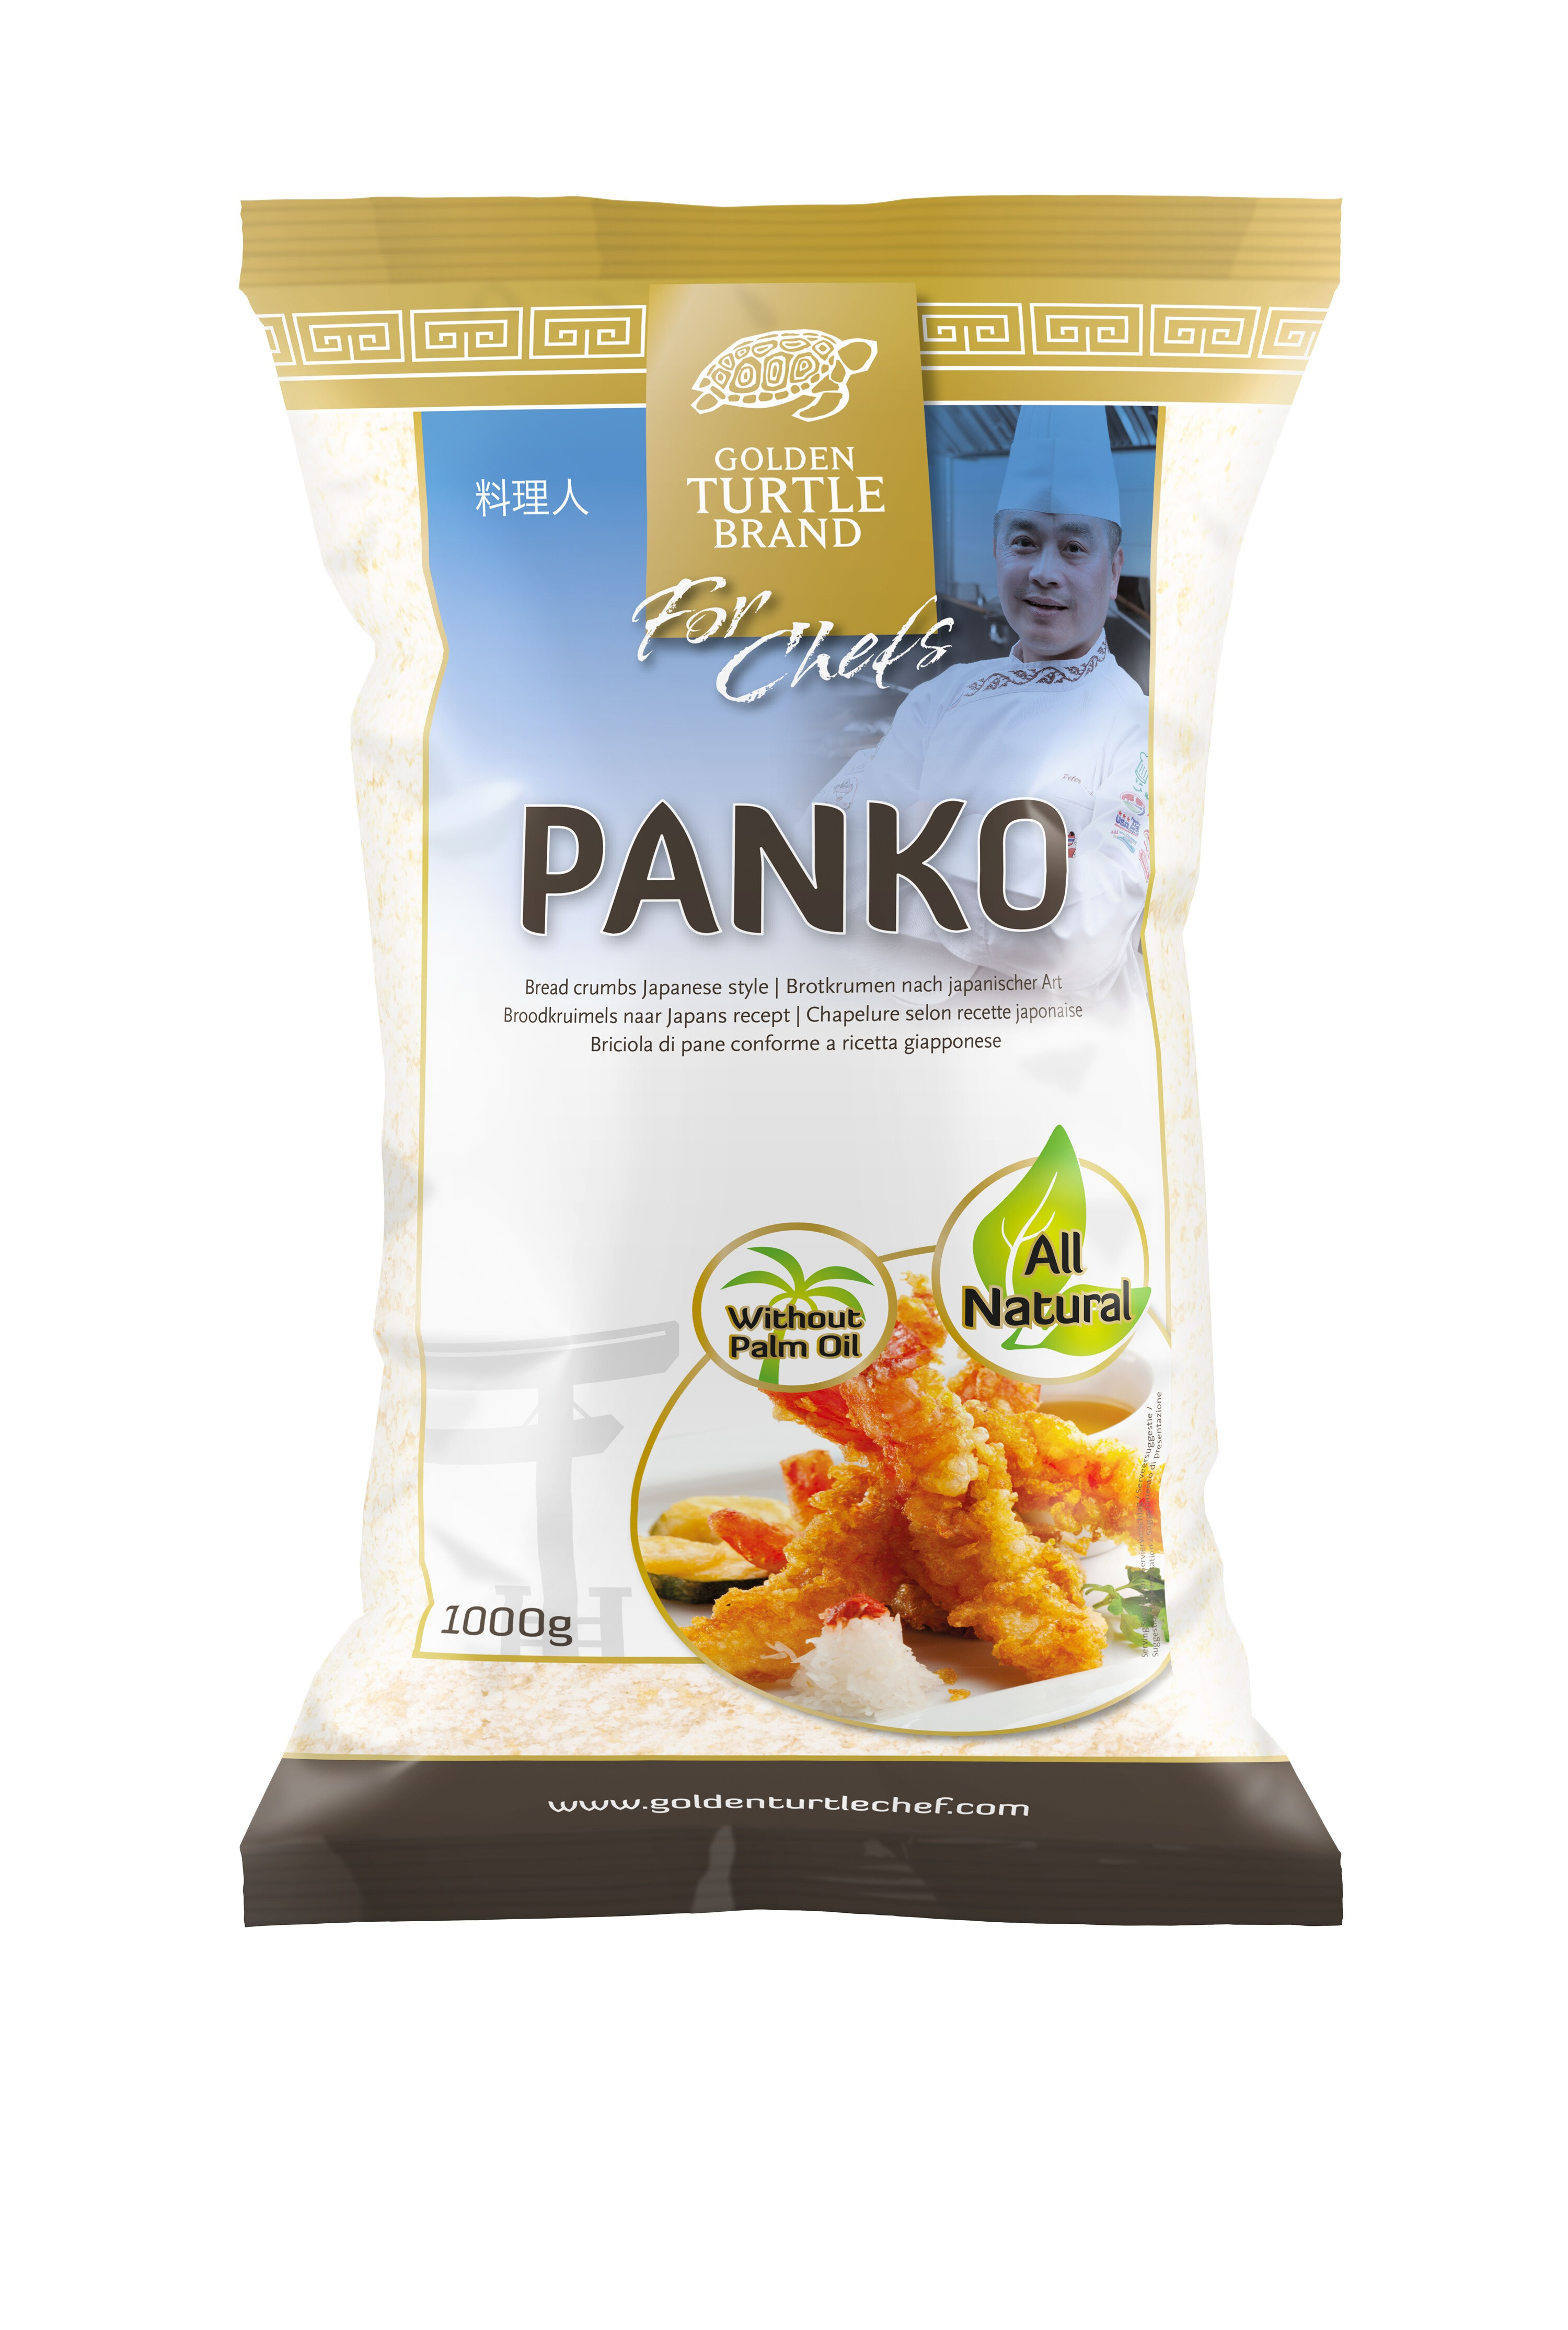 Bread crumbs Japanese style Panko flakes 1kg Golden Turtle Brand for Chefs